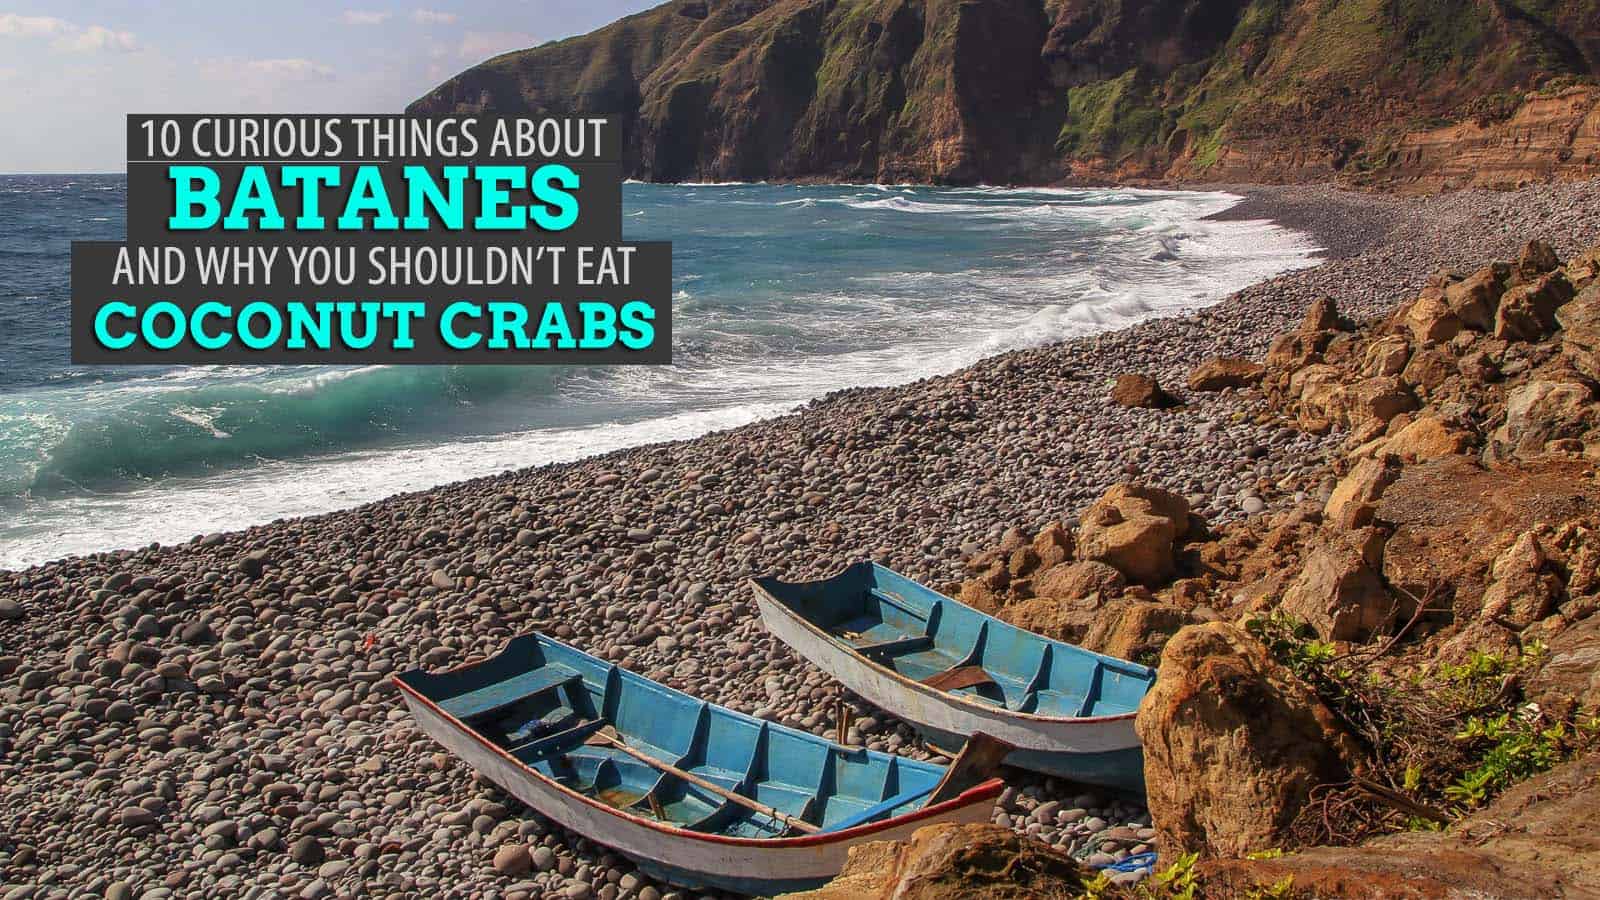 10 Curious Things About BATANES and Why You Shouldn’t Eat Coconut Crabs